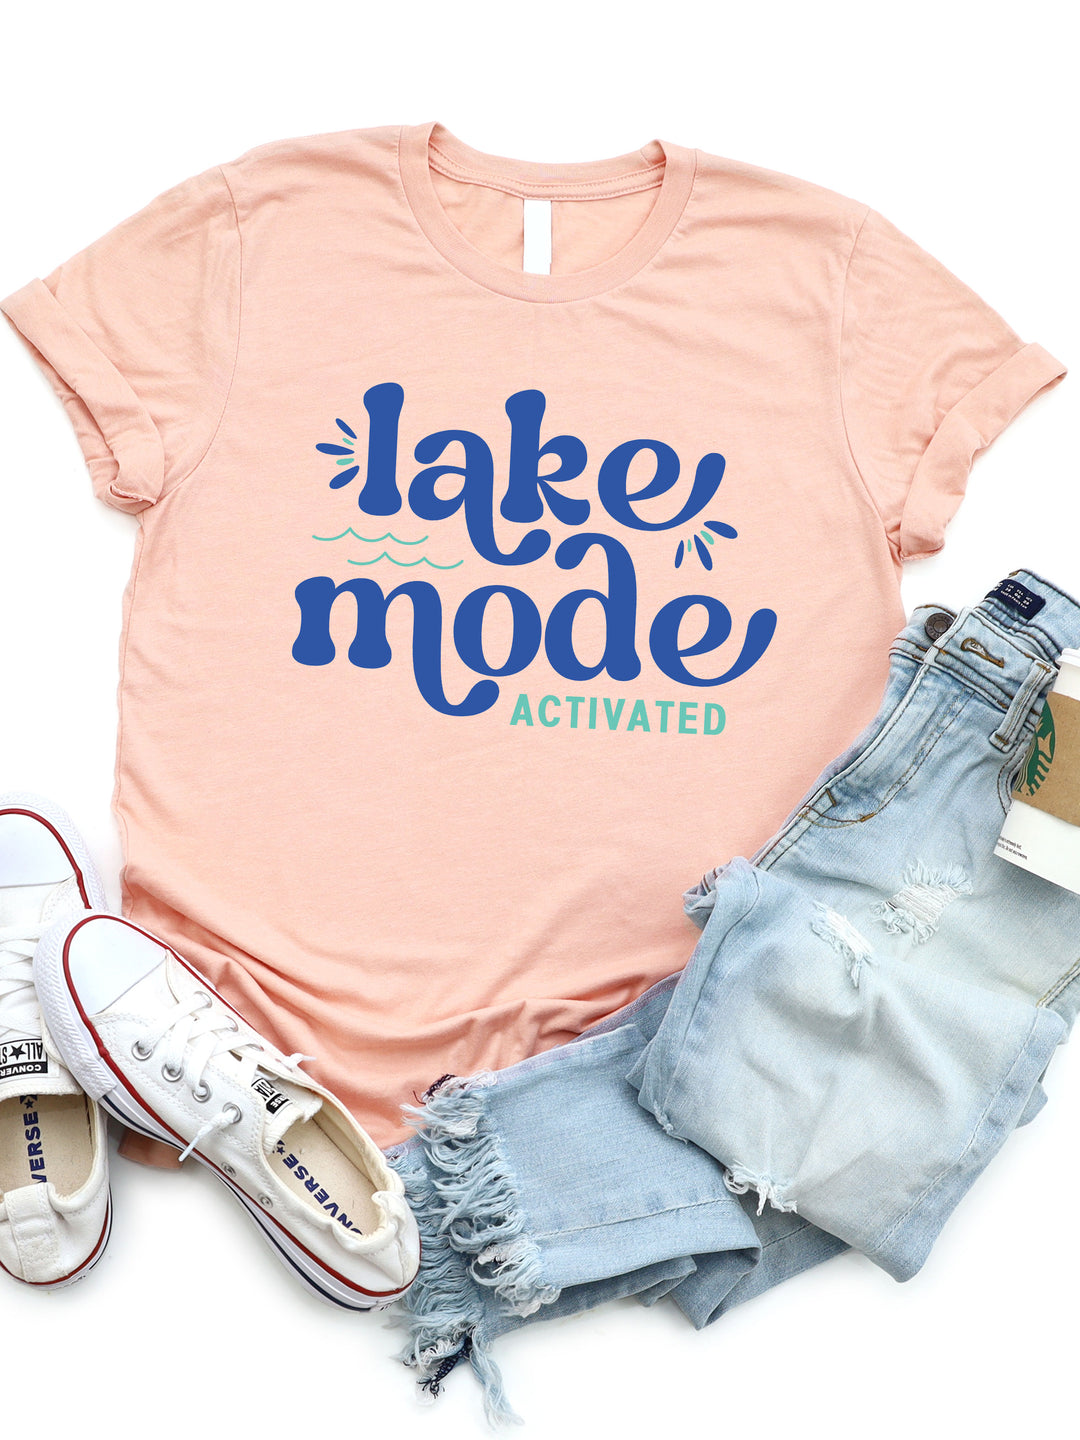 Lake Mode Activated Graphic Tee